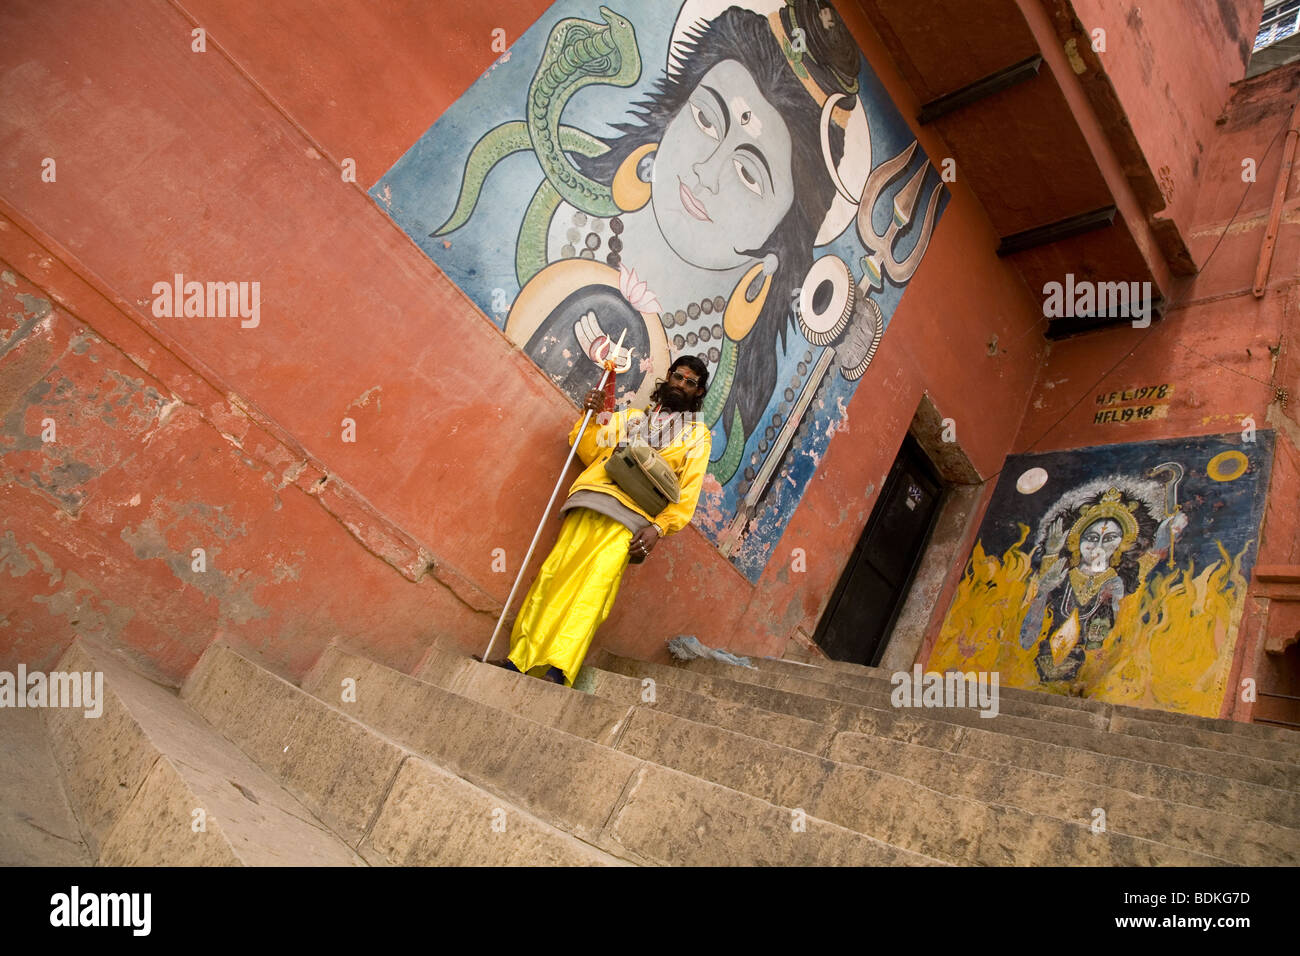 A Sadhu in the Indian city of Varanasi (Benares). He stands in front of a painted image of the Hindu god Shiva. Stock Photo